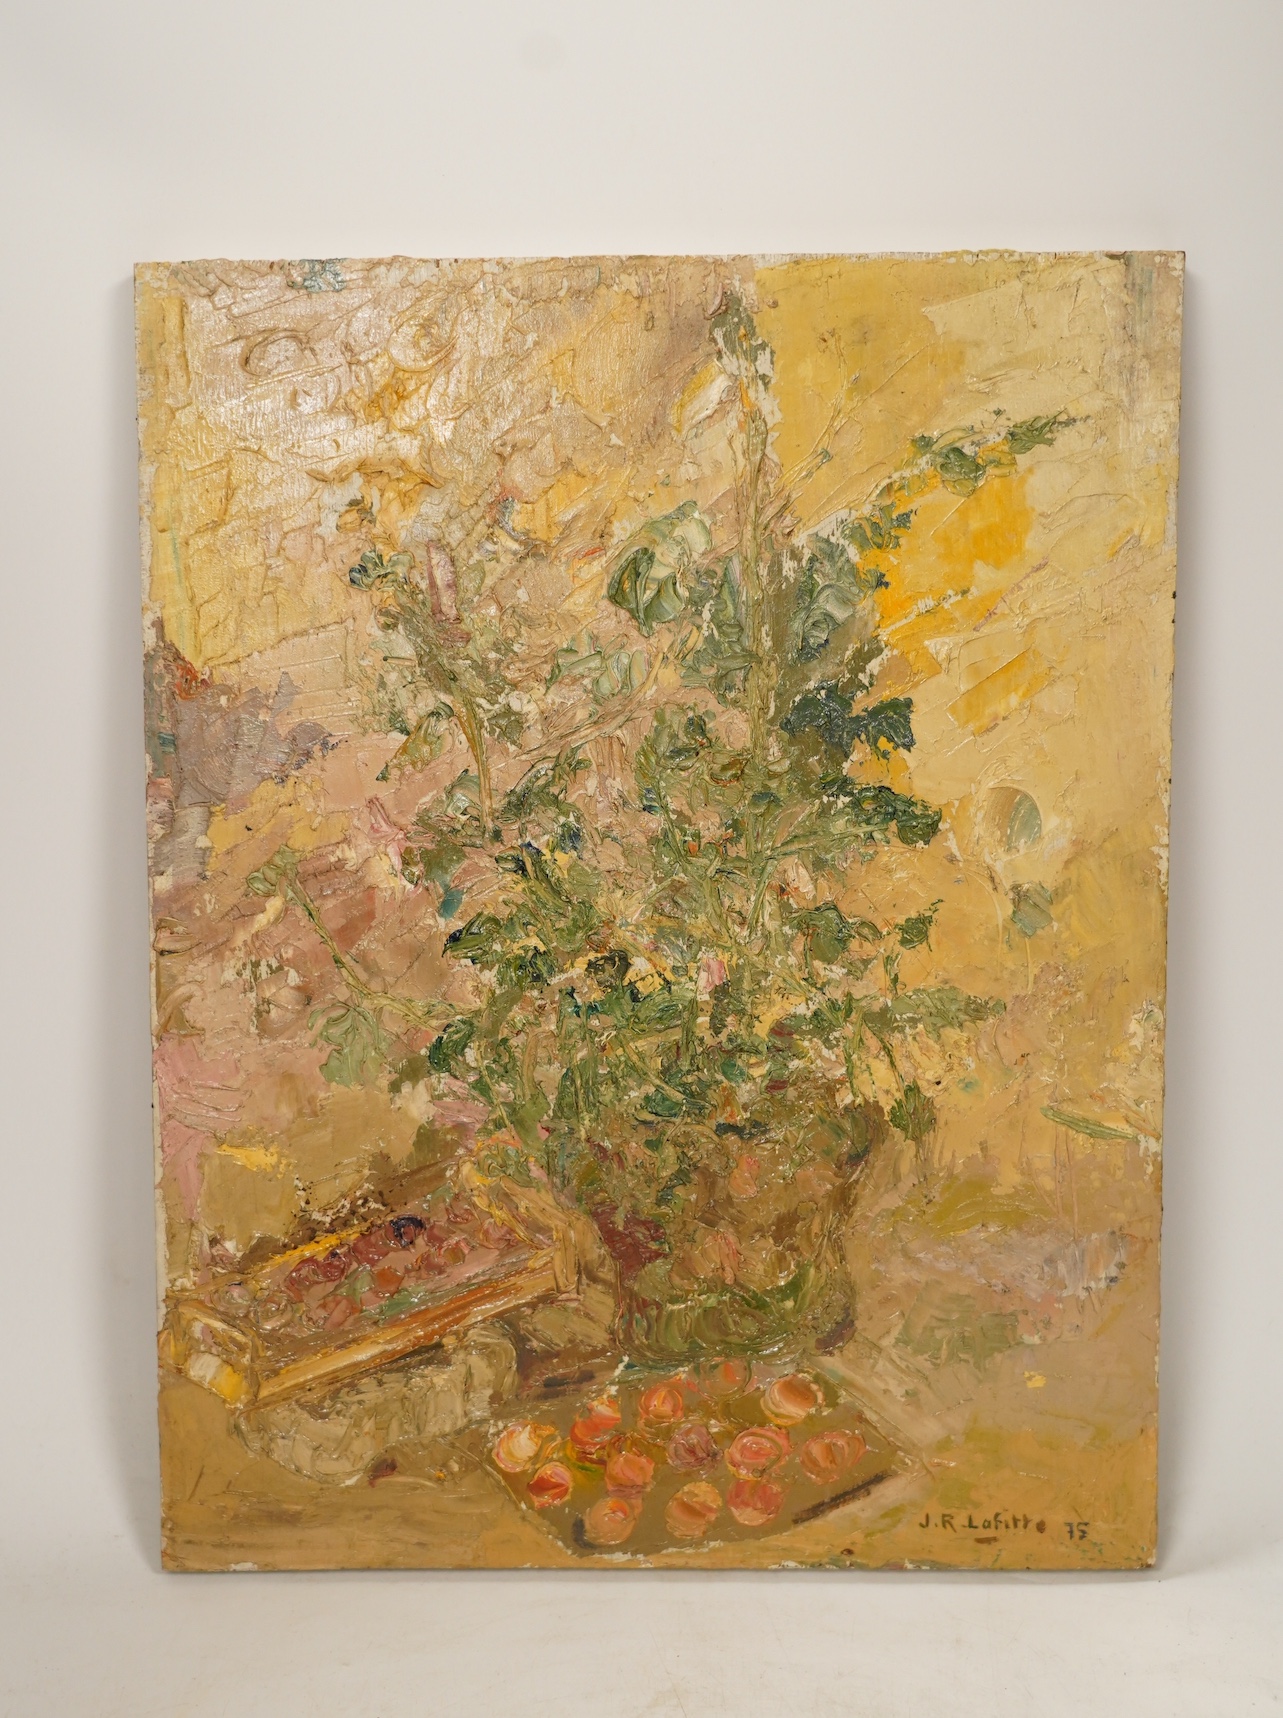 Jean-Roger Lafitte (French, 1922-2005), impasto oil on board, Still life of flowers in a vase, signed and dated '75, 36 x 27cm, unframed. Condition - fair